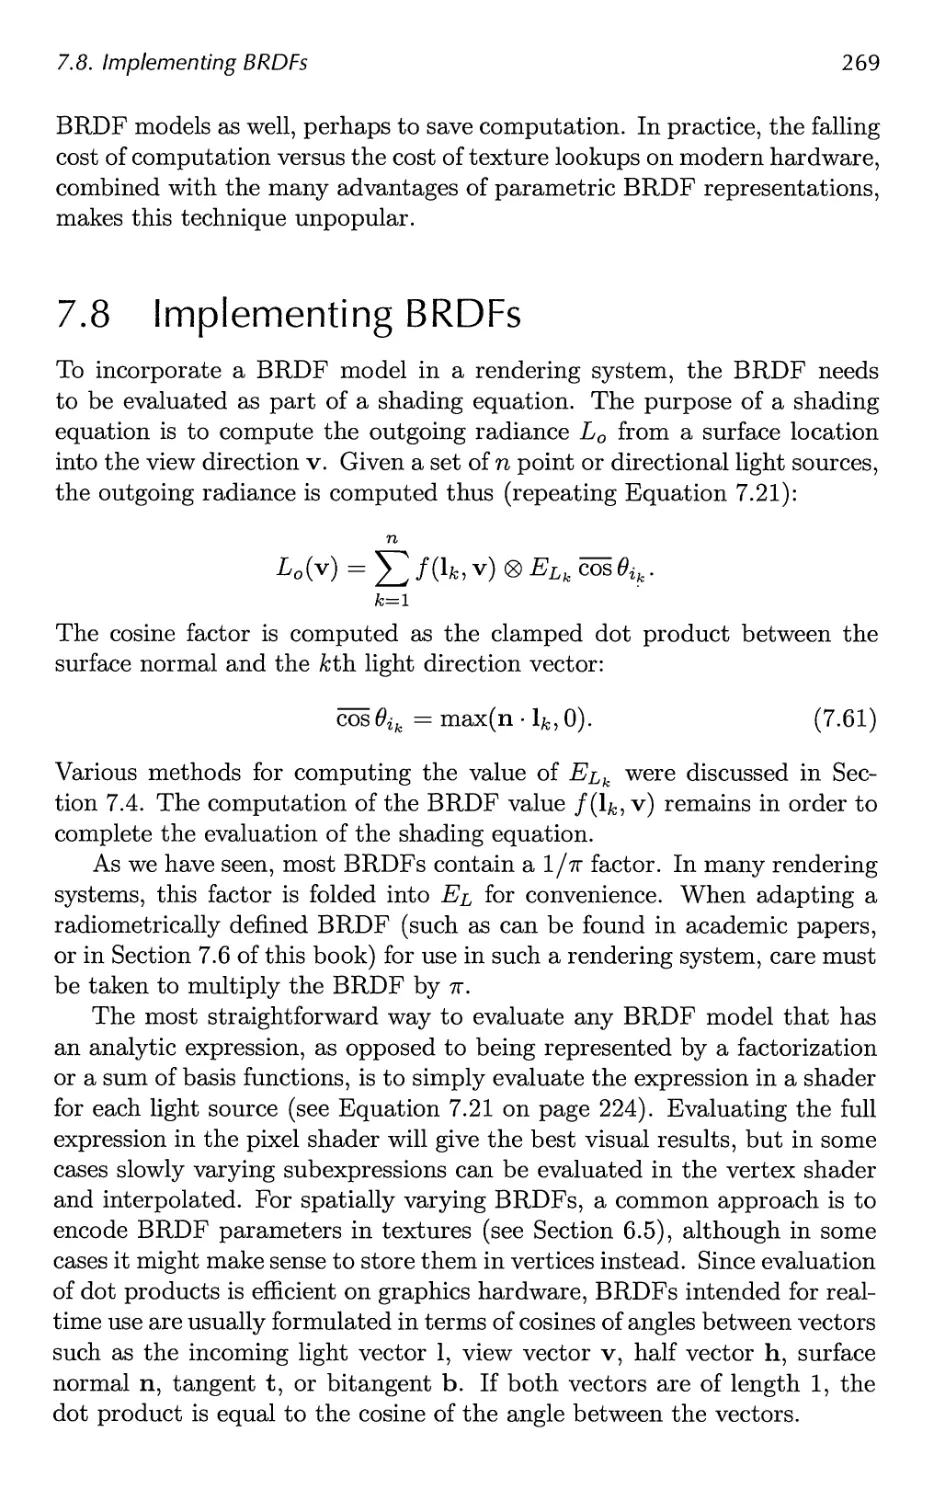 7.8 Implementing BRDFs